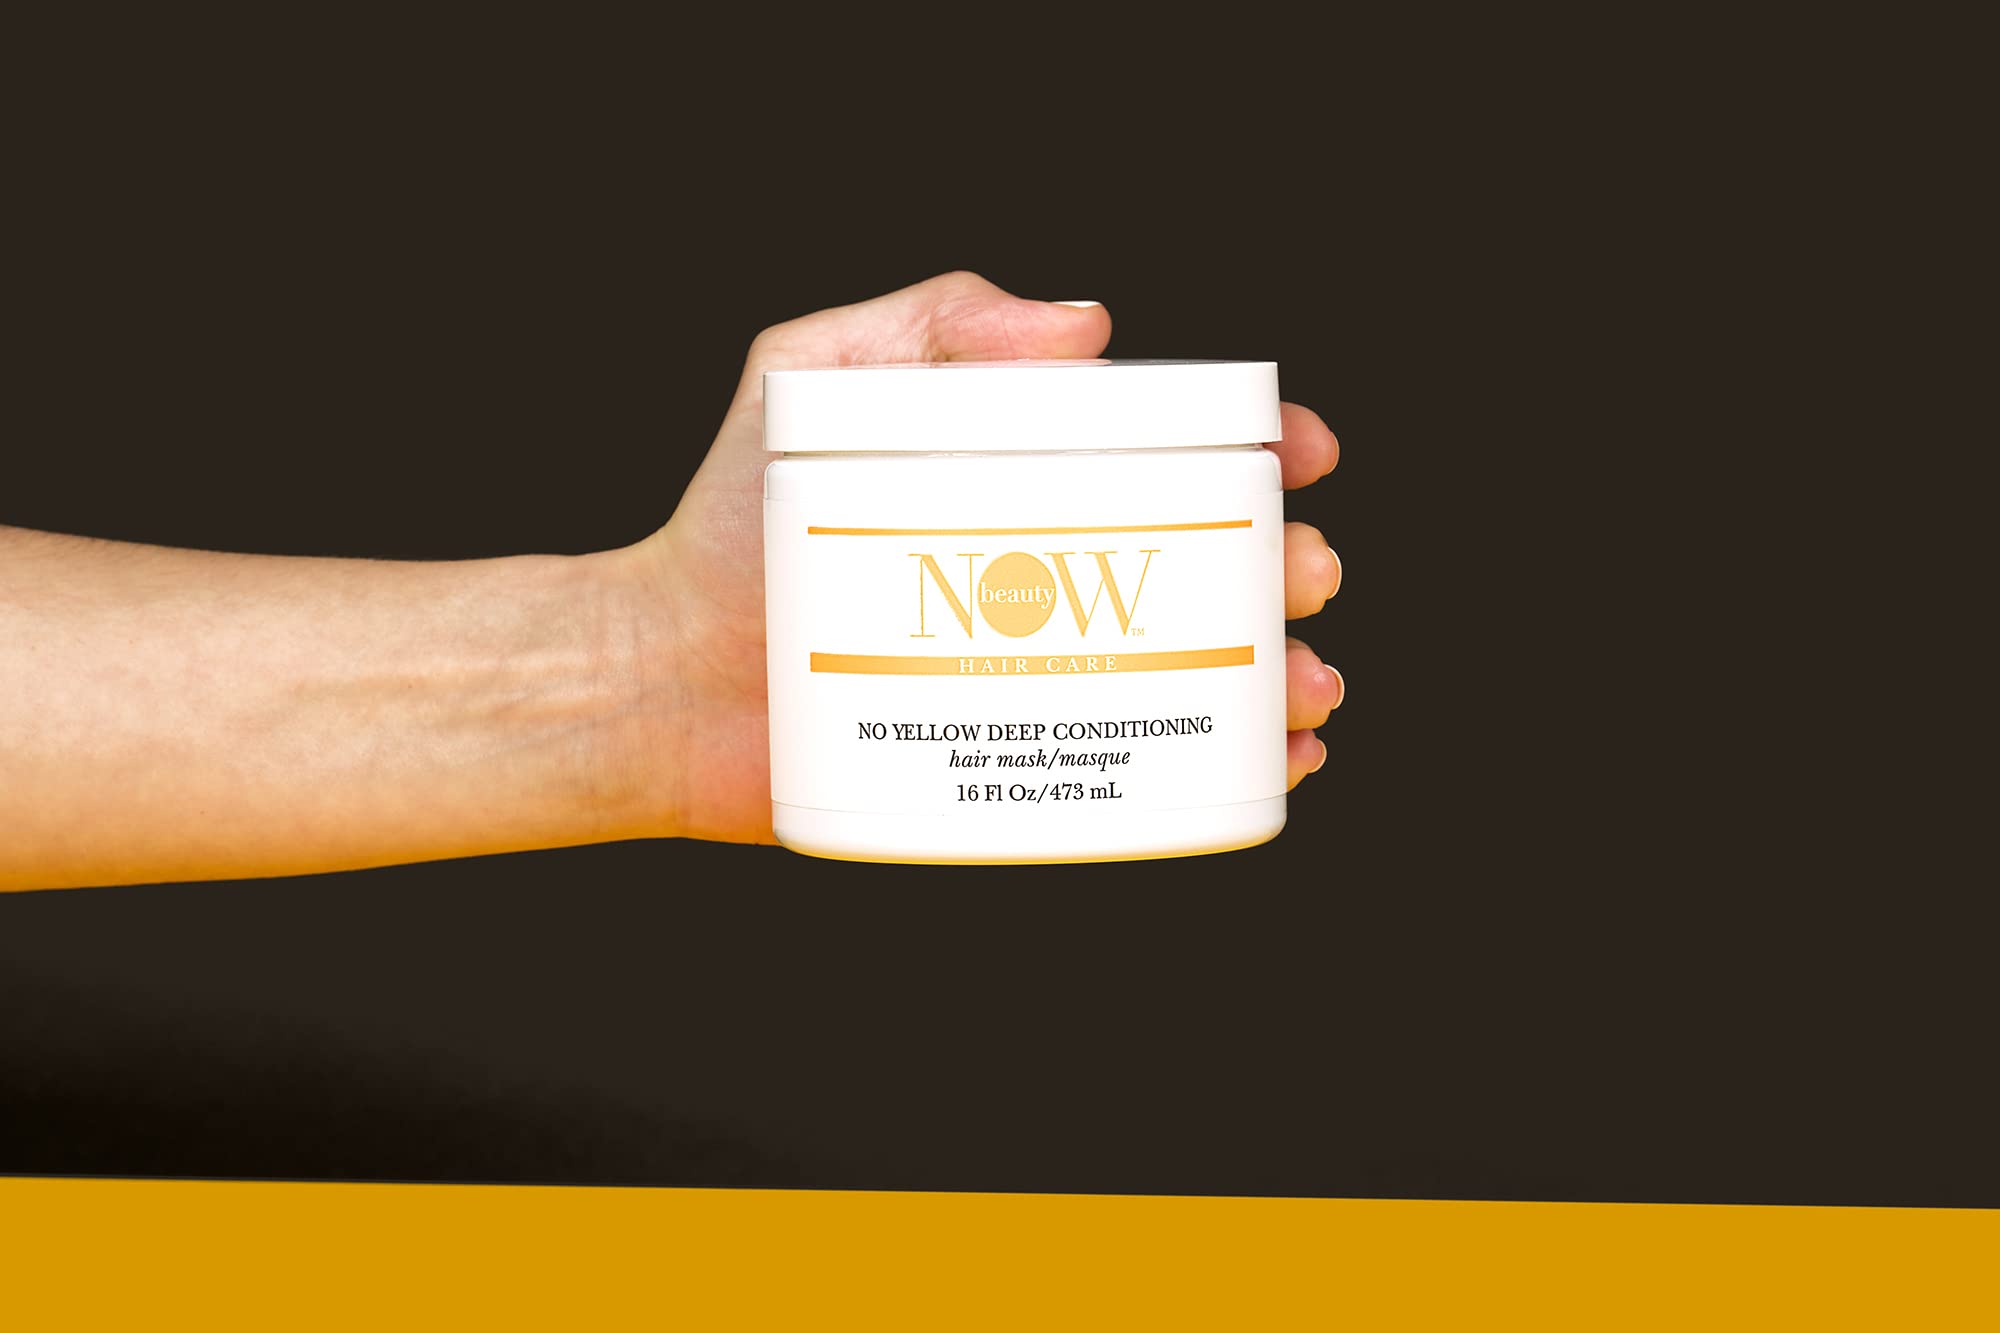 NOW BEAUTY The Ultra Hydrating No Yellow Hair Mask -Conditioning, Repairing Purple Mask Treatment - Reduces Brassiness In Natural Blonde Or Color-Treated Hair - Paraben And Sulfate Free - 16 Oz